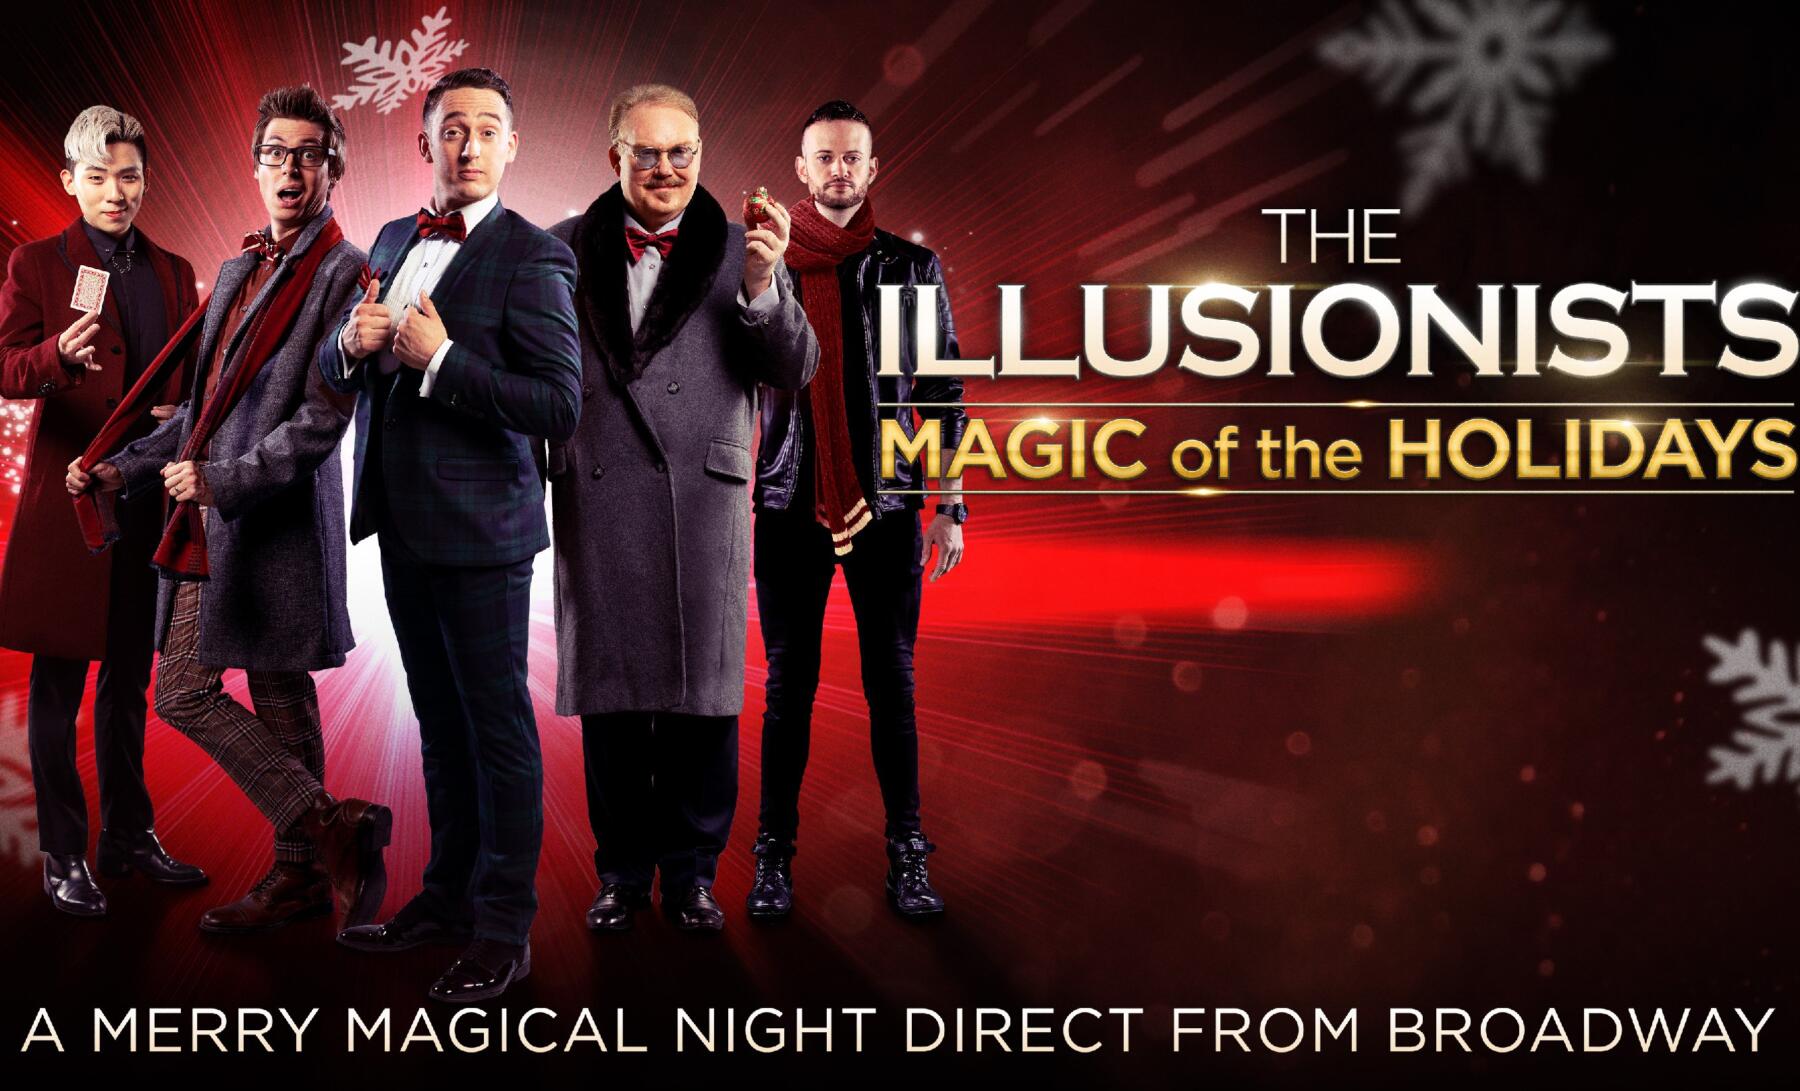 The Illutionists